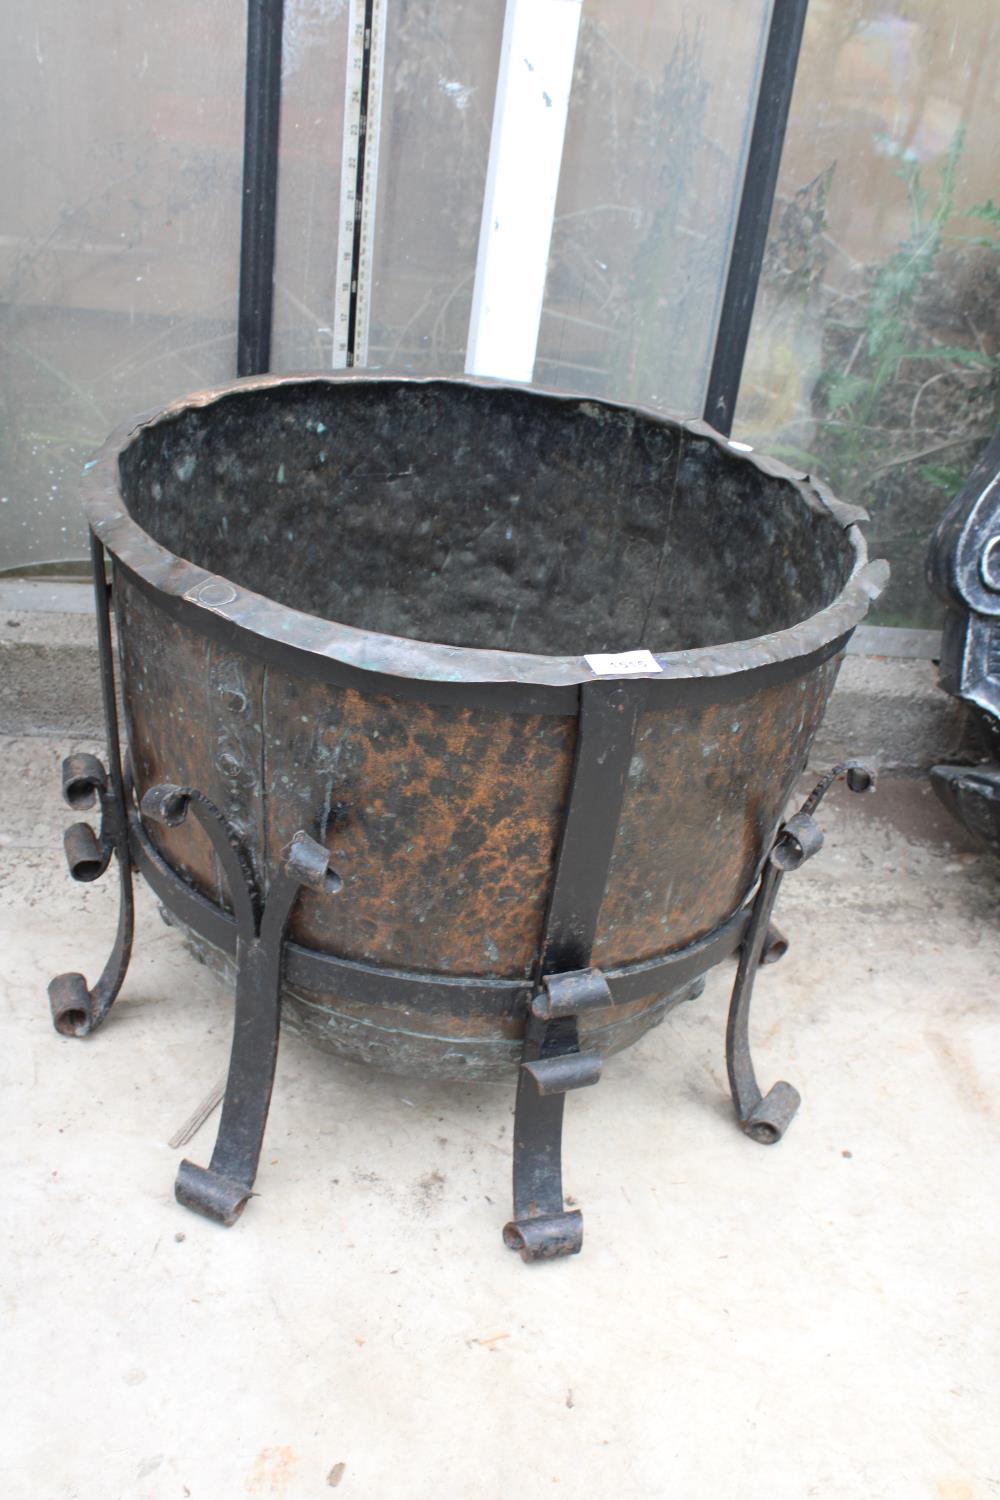 A LARGE VINTAGE AND DECORATIVE COPPER PLANTER WITH WROUGHT IRON STAND (D:53CM)